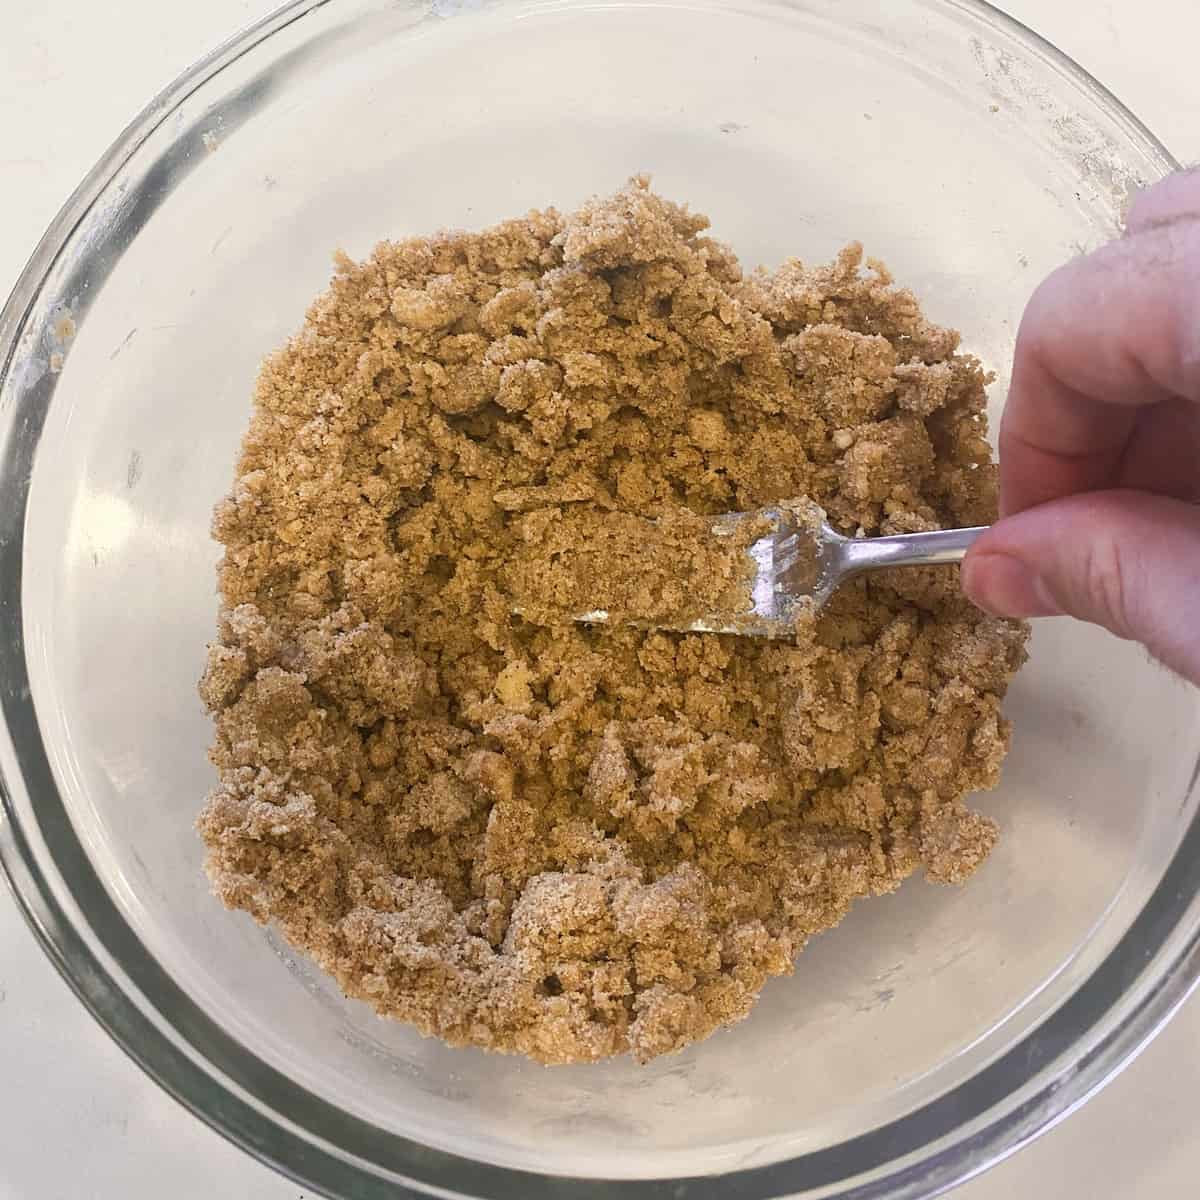 Using a fork to make the brown sugar crumble topping.